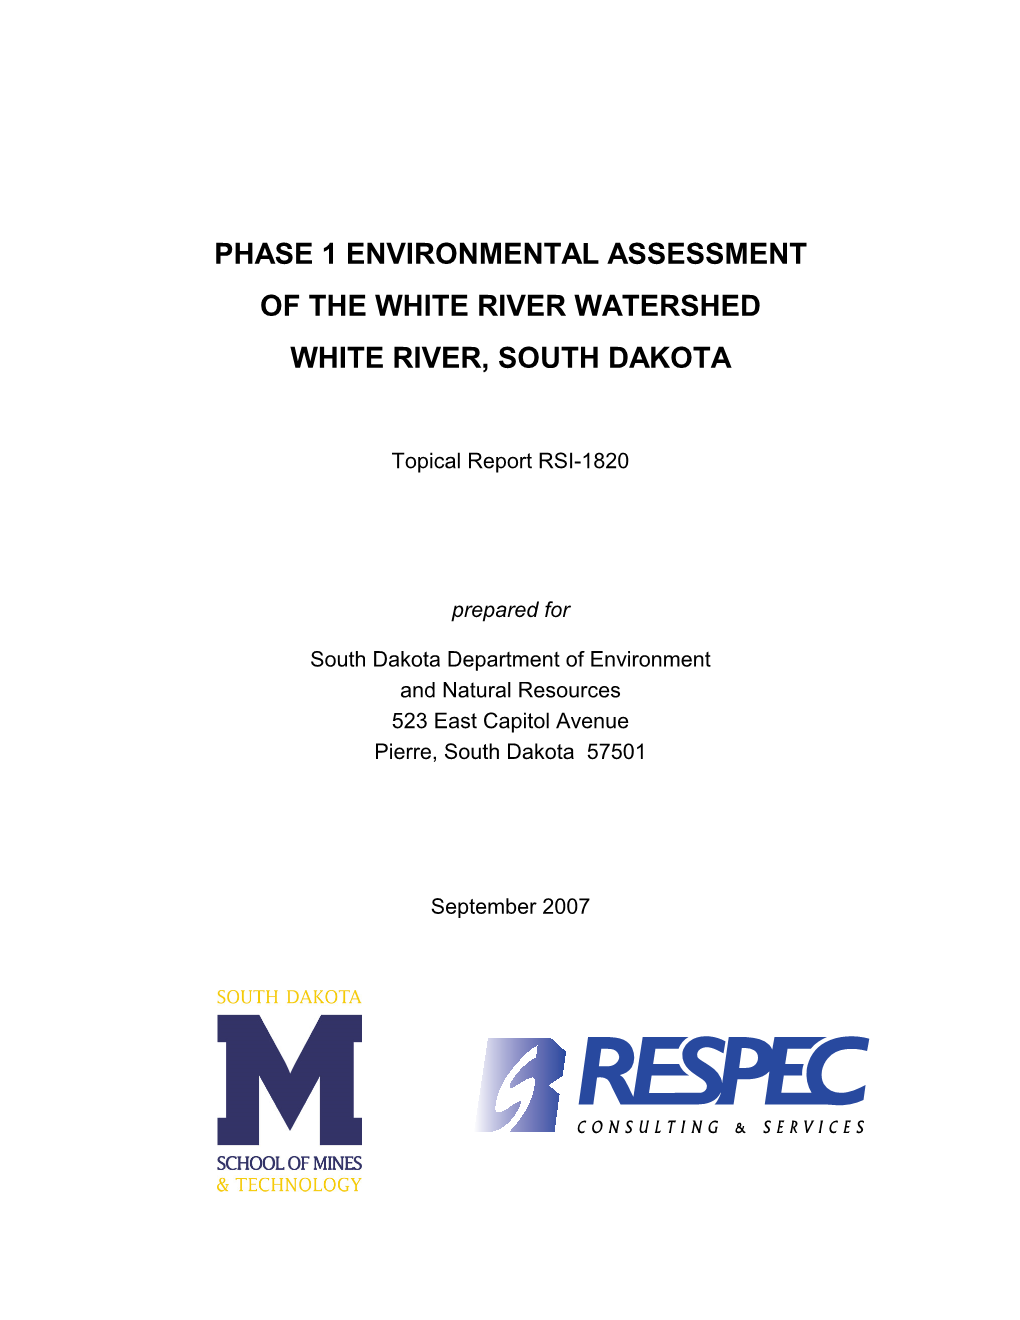 White River Watershed Assessment Project